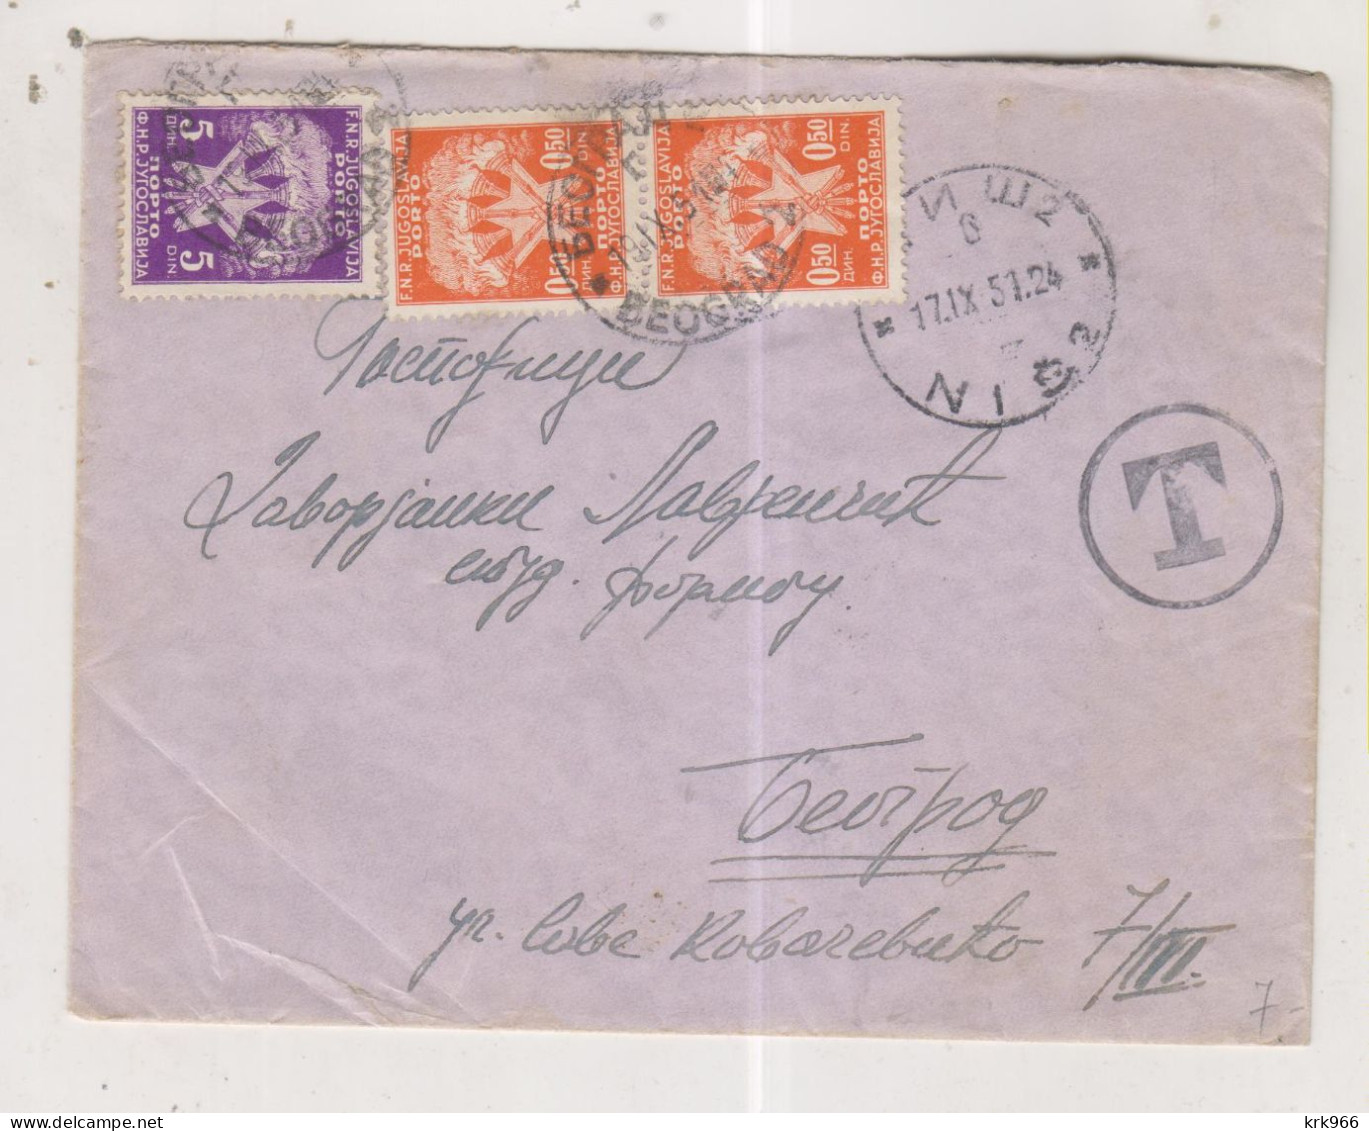 YUGOSLAVIA,1951 NIS Nice Cover To Beograd Postage Due - Lettres & Documents